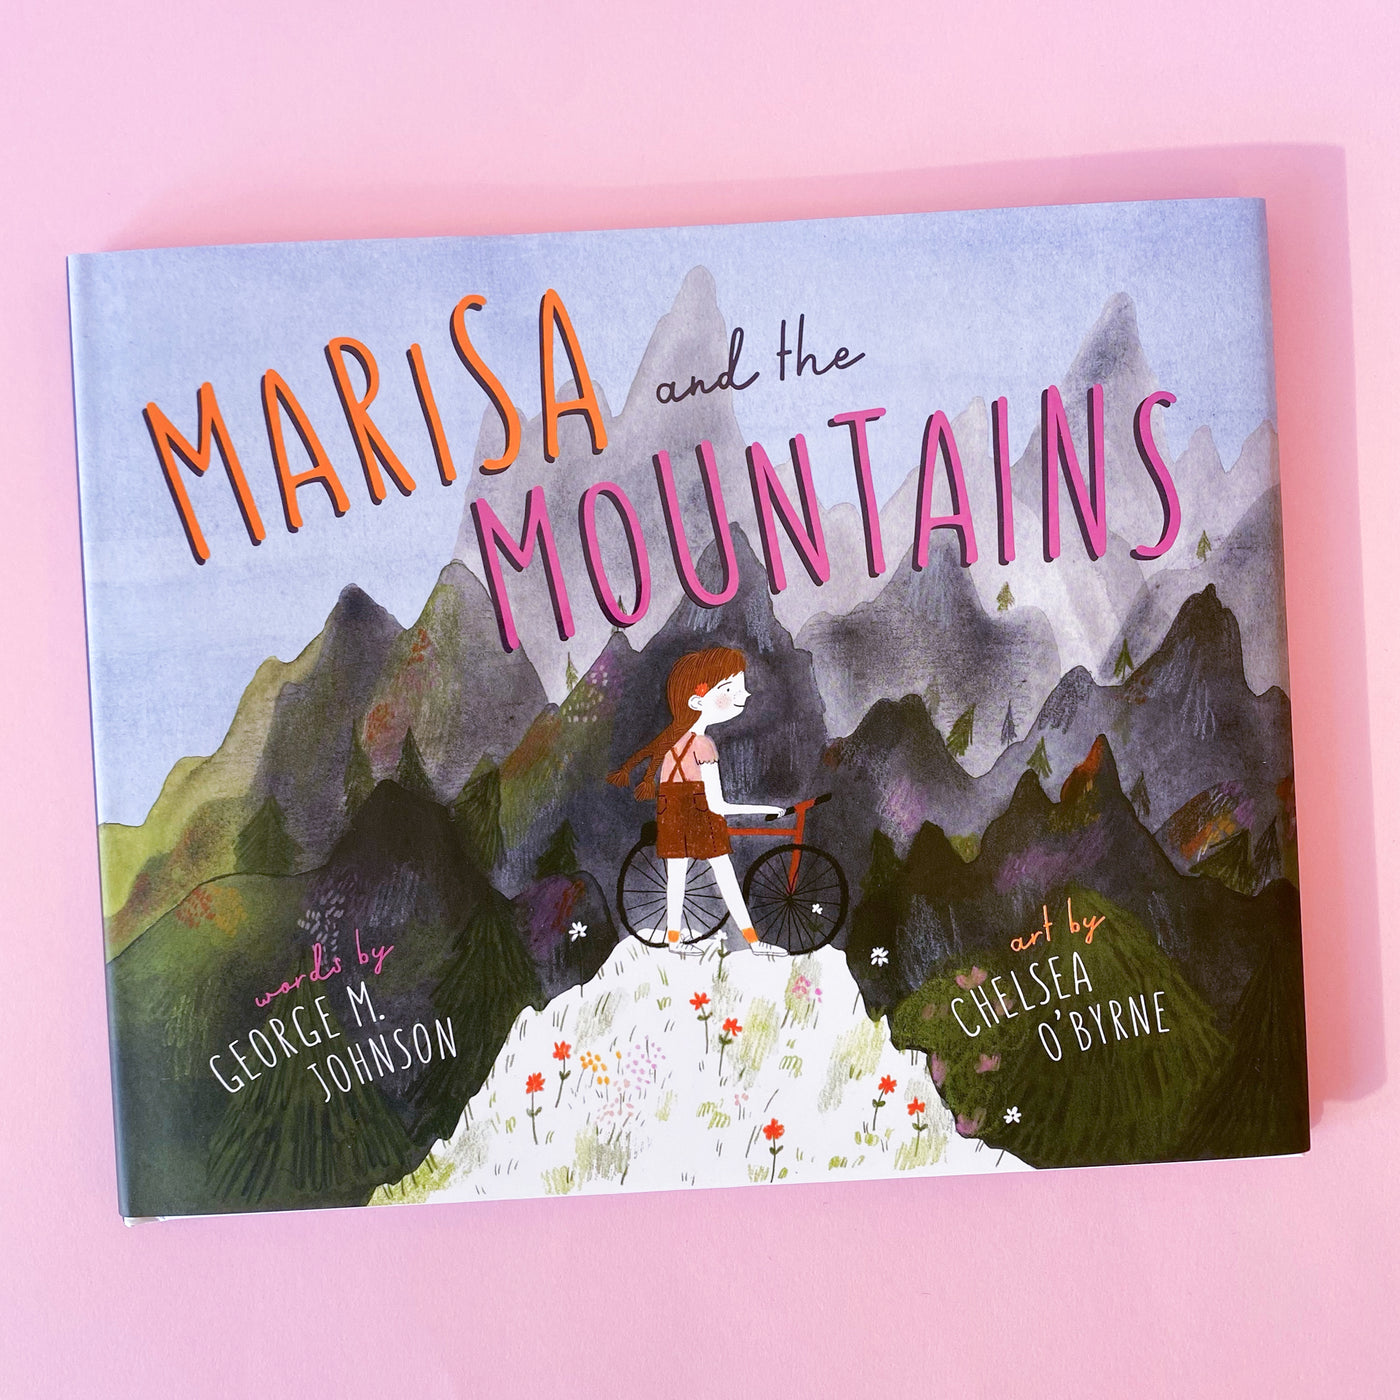 Marisa and the Mountains by George M. Johnson and Chelsea O'Bryne